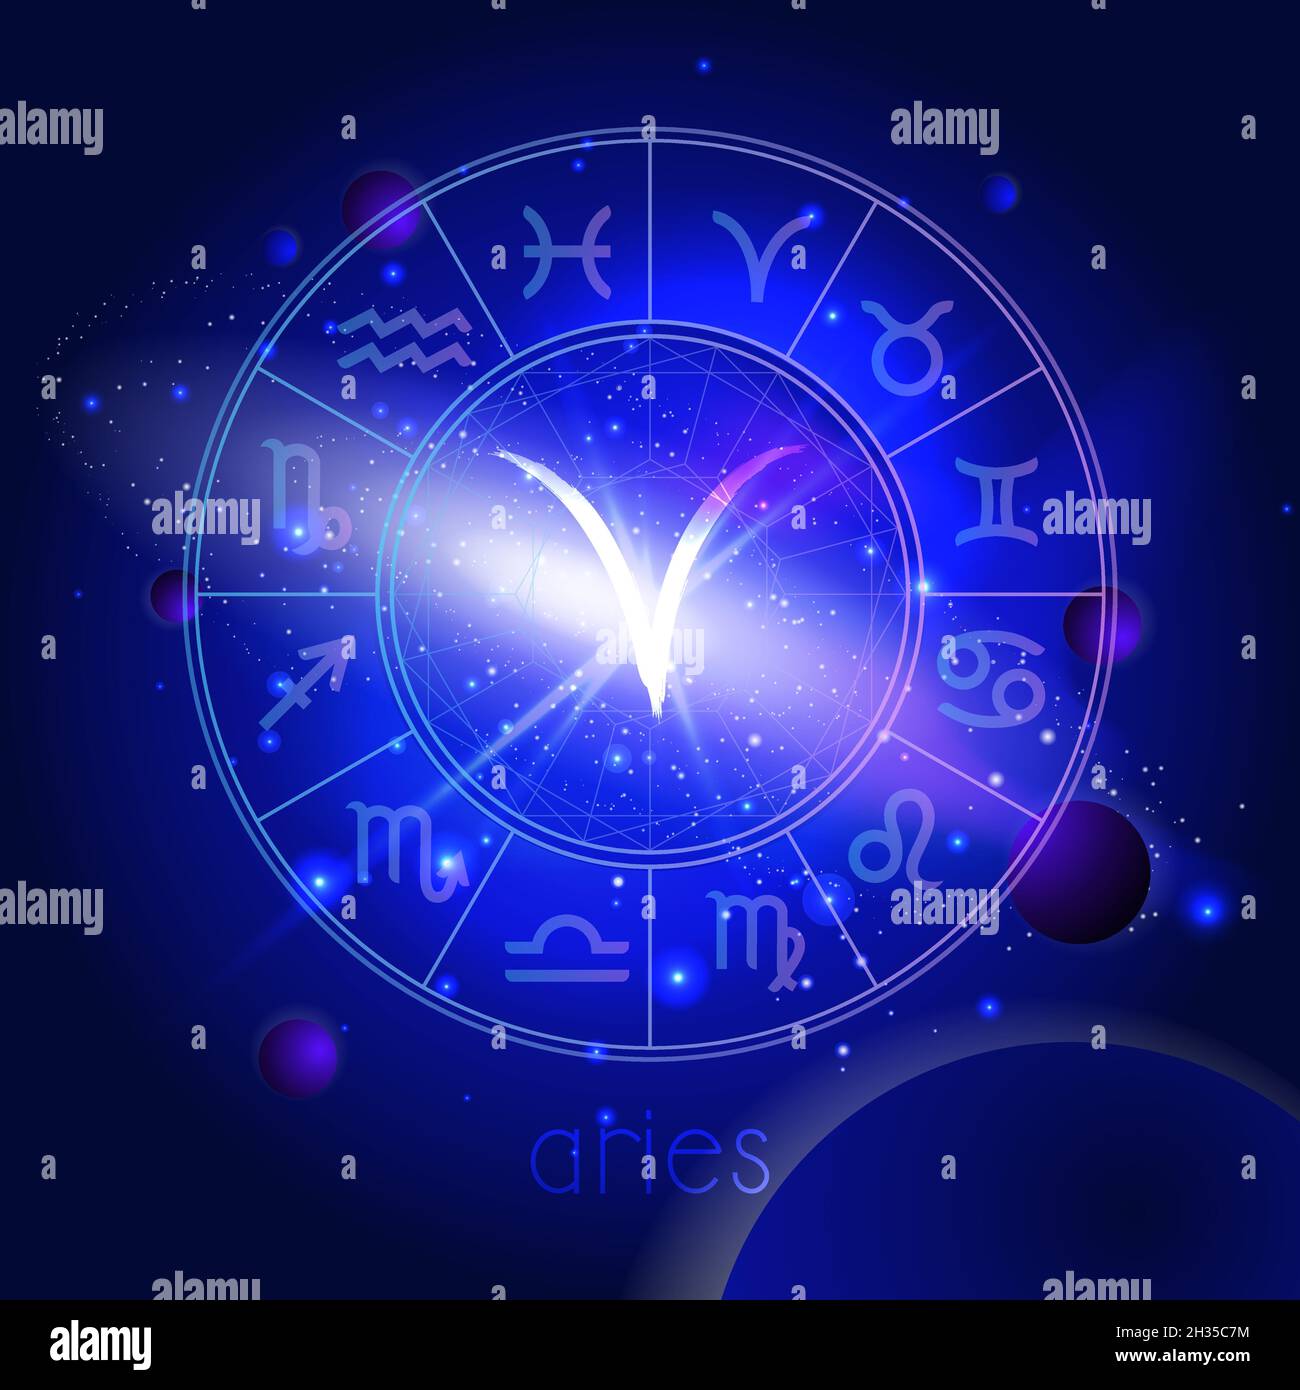 Vector illustration of sign ARIES with Horoscope circle against the space background with planets and stars. Sacred symbols in blue colors. Stock Vector